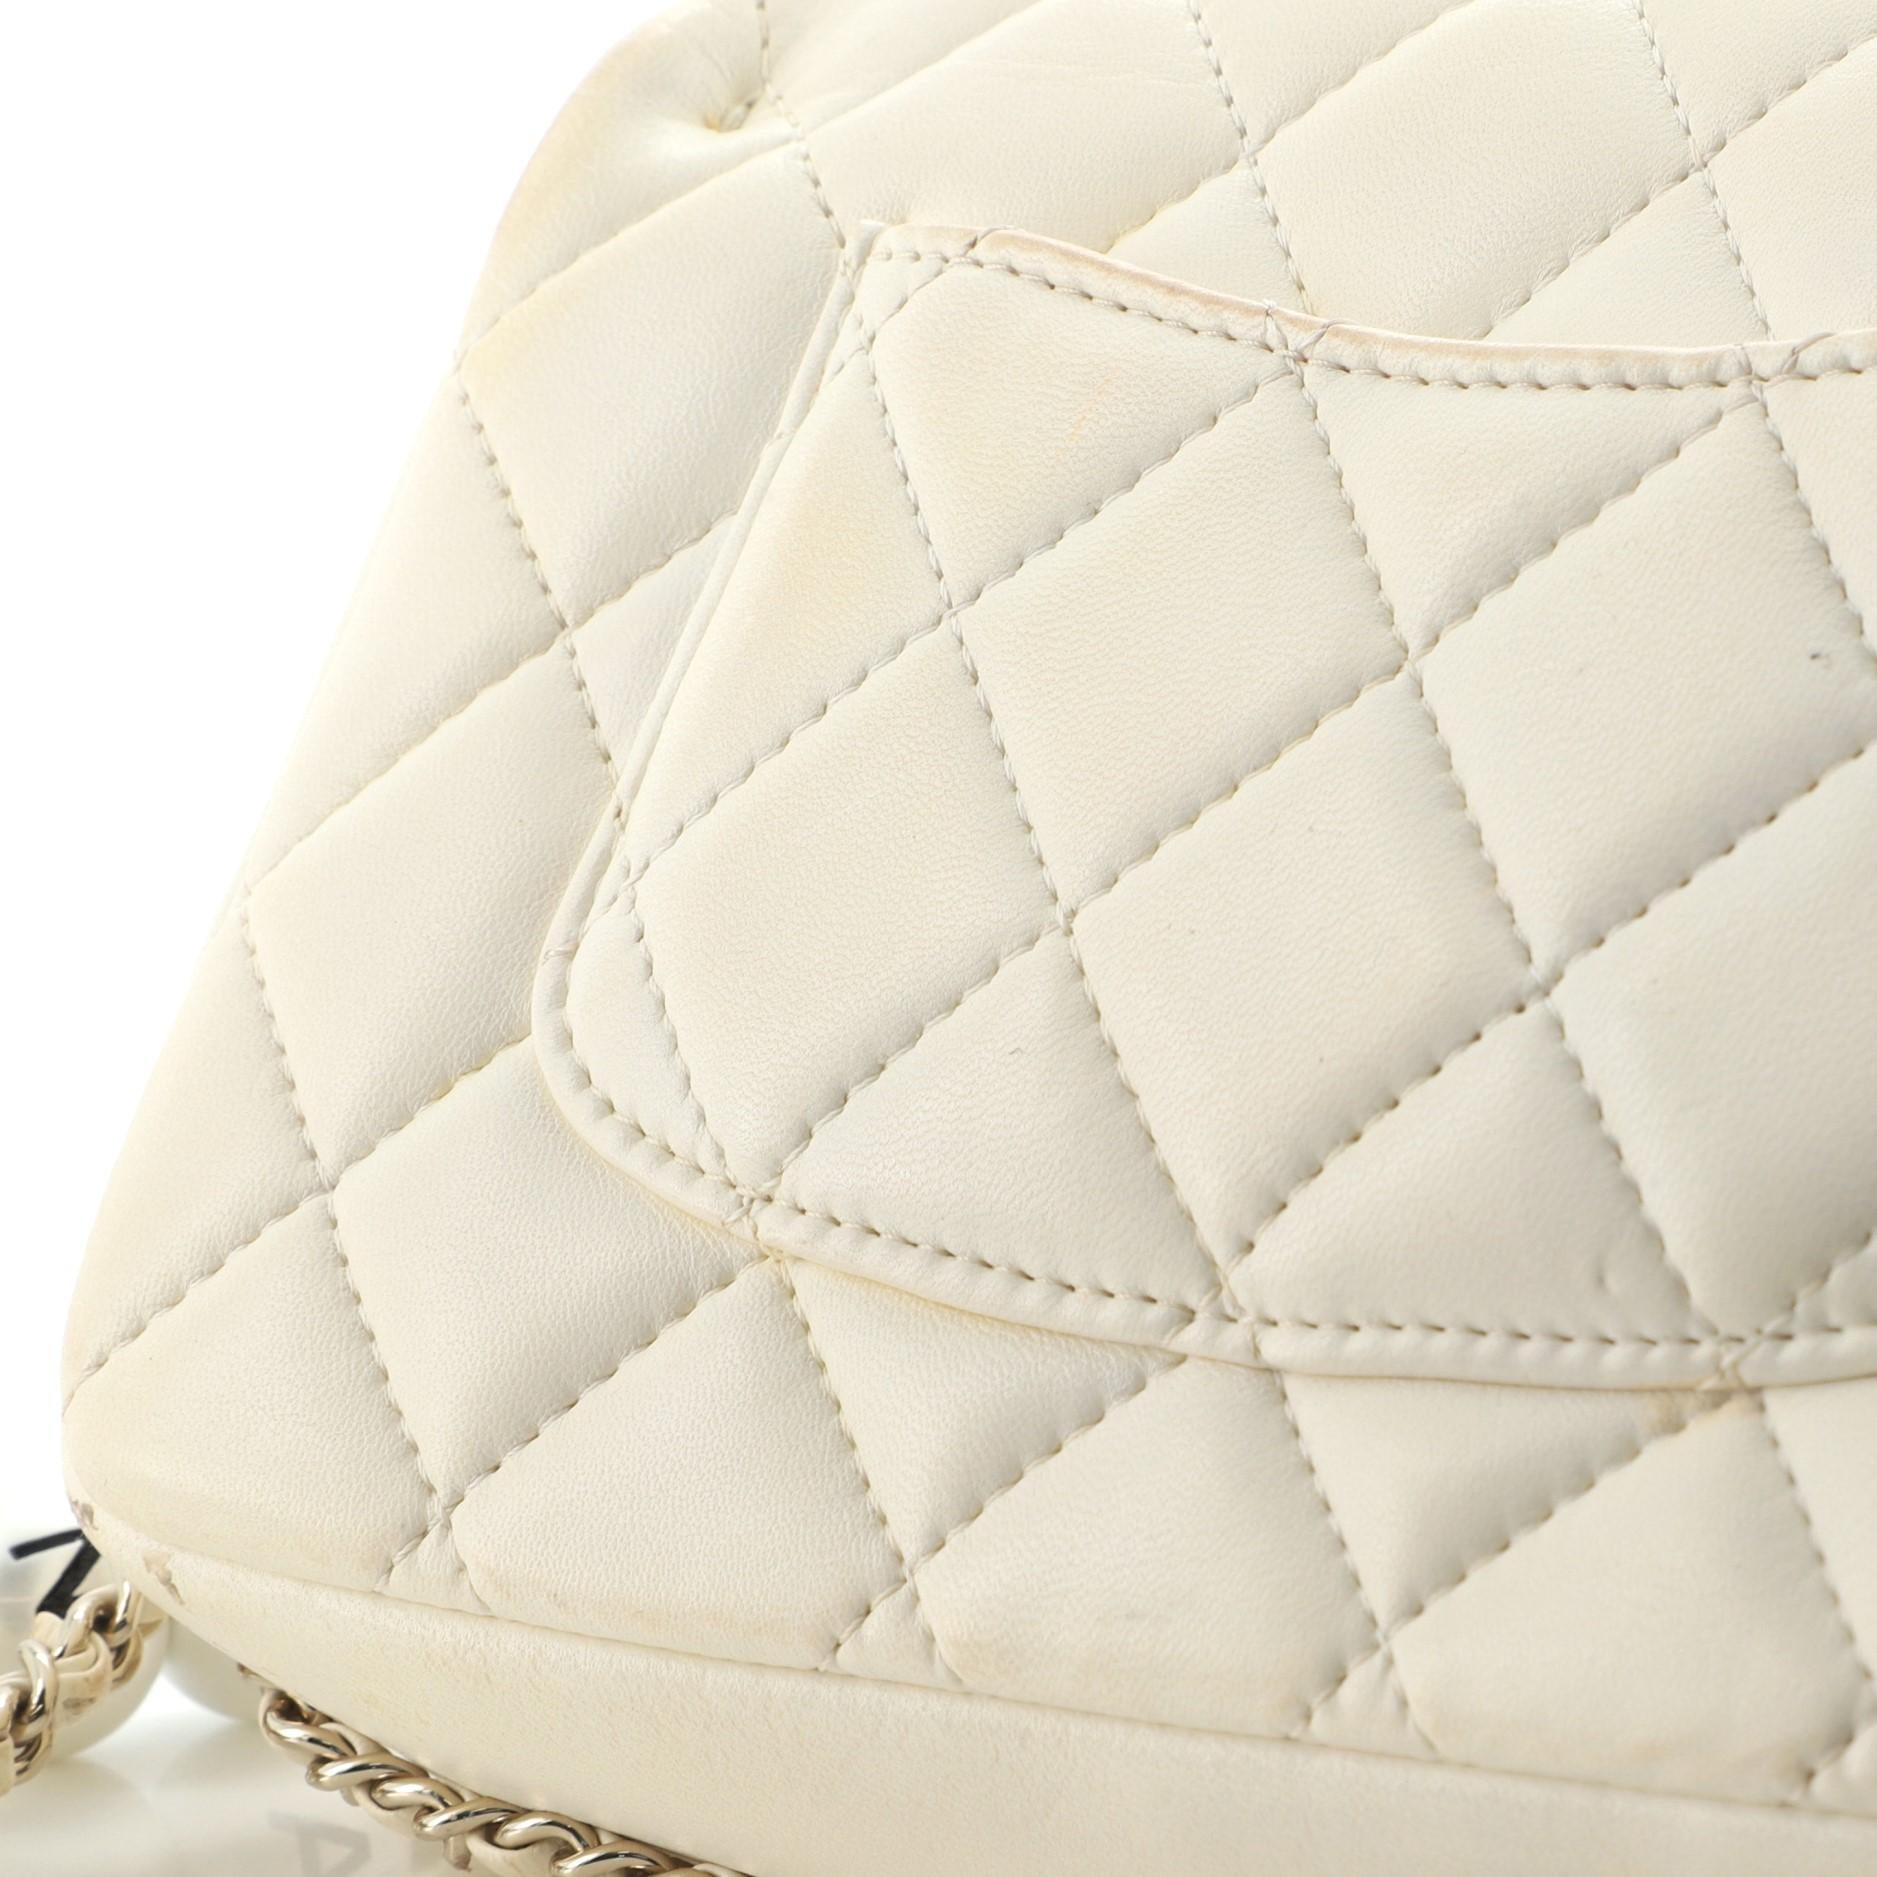 Women's or Men's Chanel My Precious Pearls Chain Flap Bag Quilted Lambskin Small